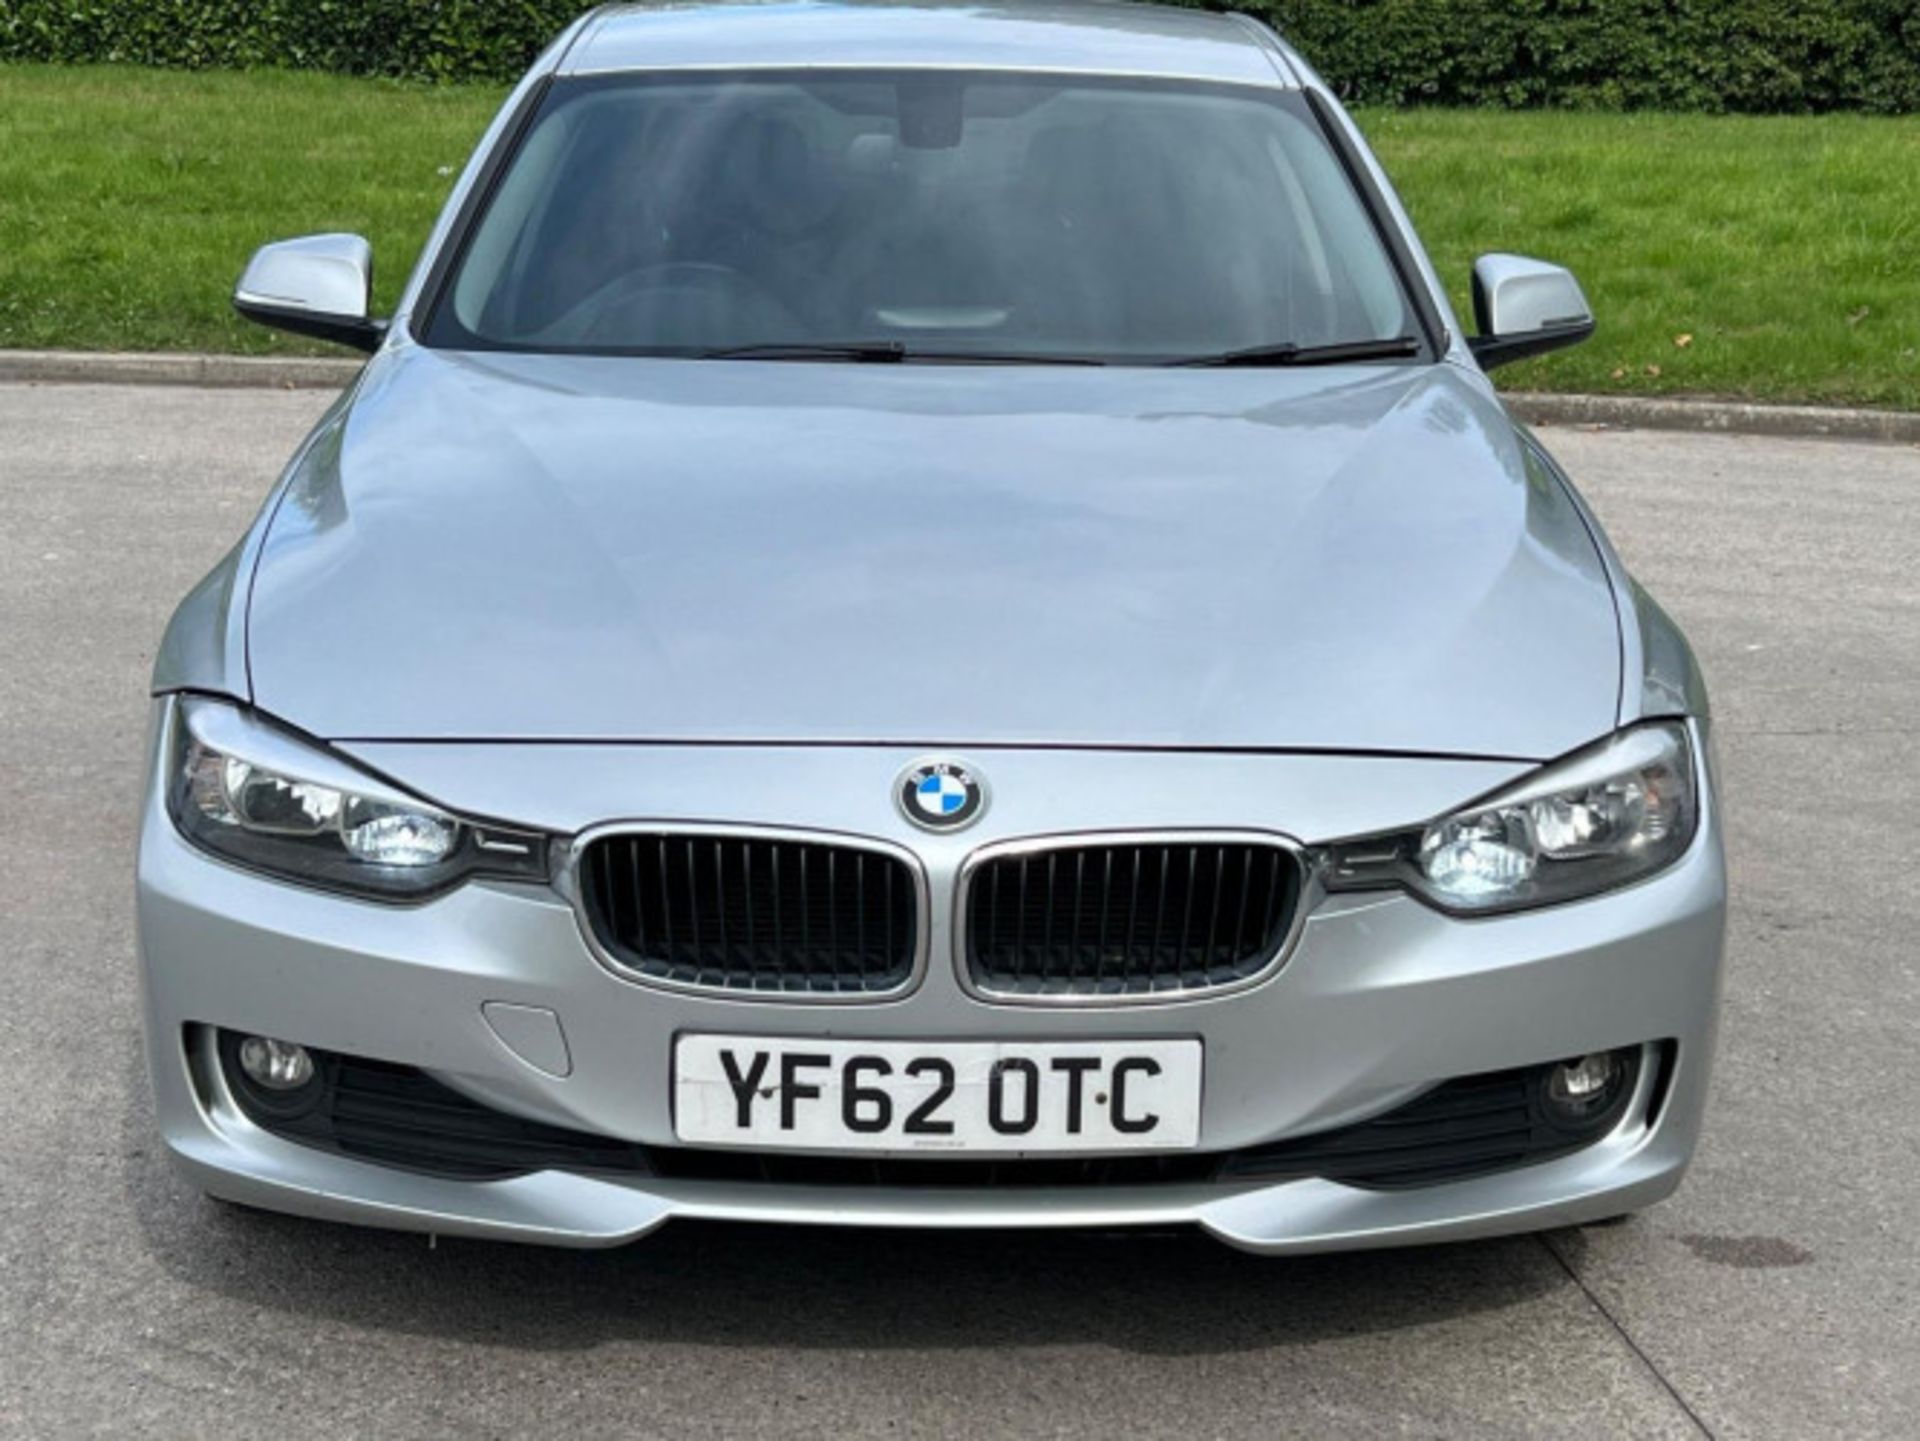 BMW 3 SERIES 2.0 DIESEL ED START STOP - A WELL-MAINTAINED GEM >>--NO VAT ON HAMMER--<< - Image 225 of 229